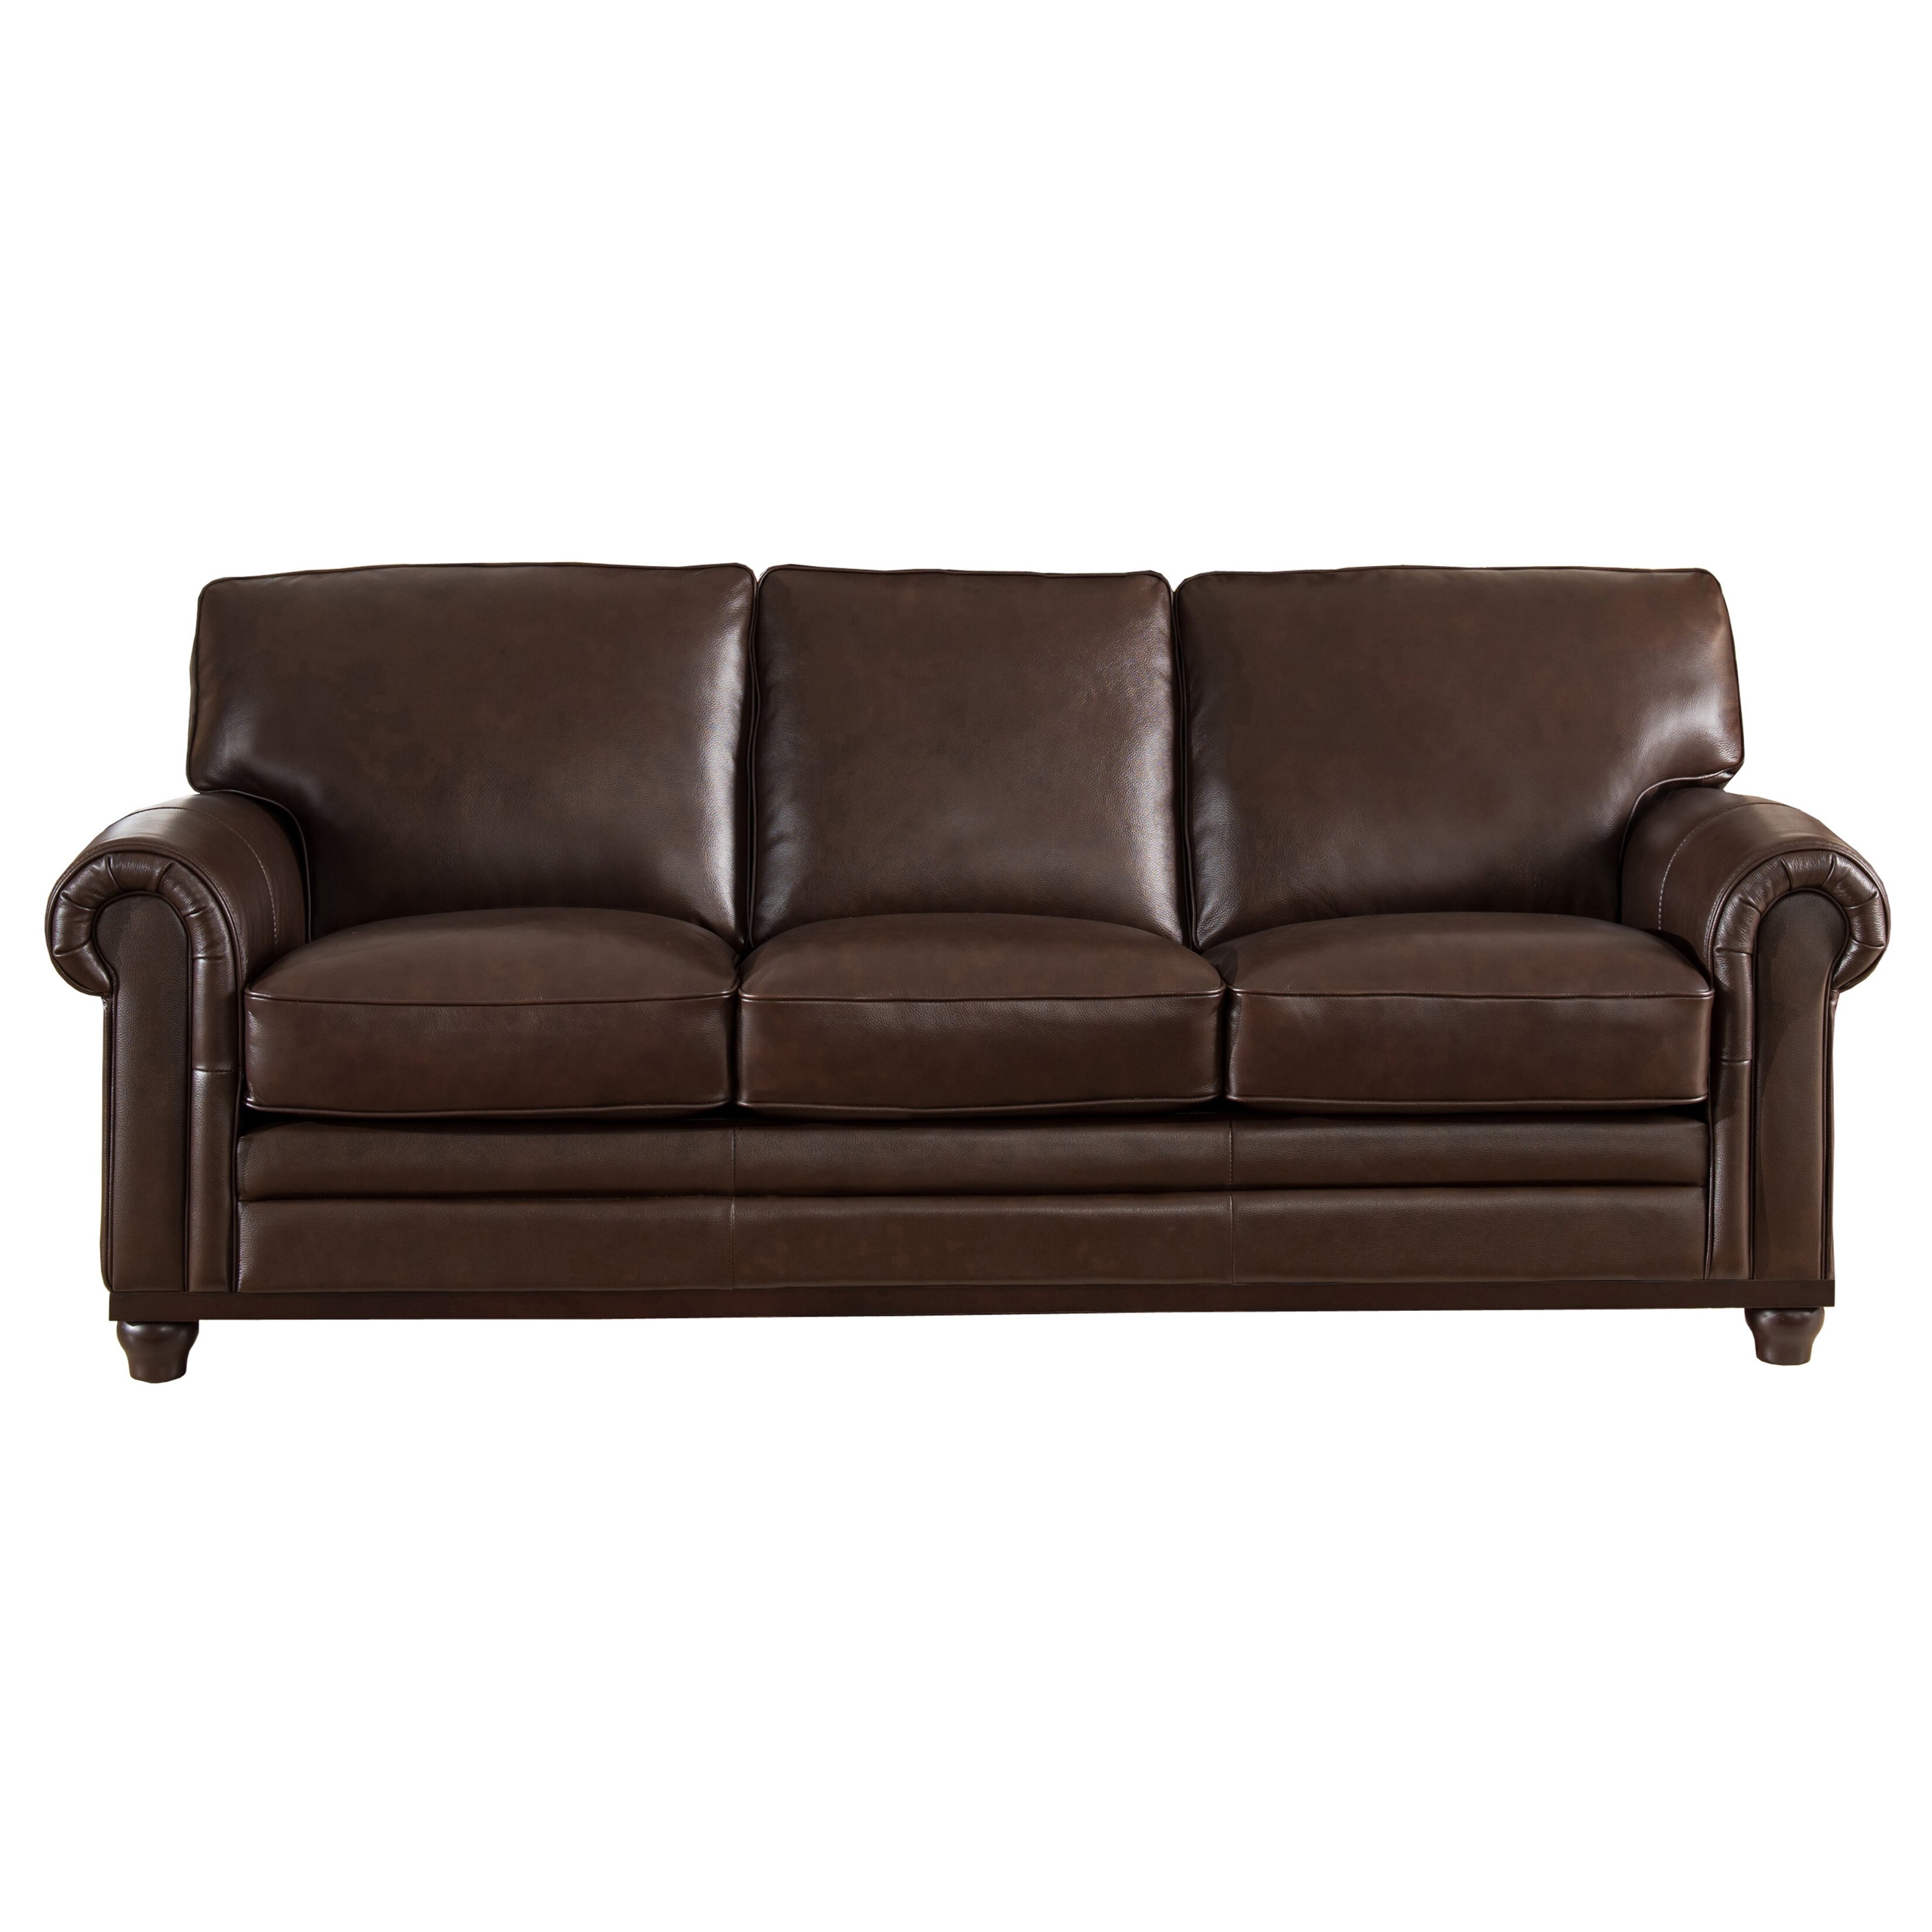 Full Grain Leather Sofa Visualhunt, Top Quality Leather Furniture Manufacturers